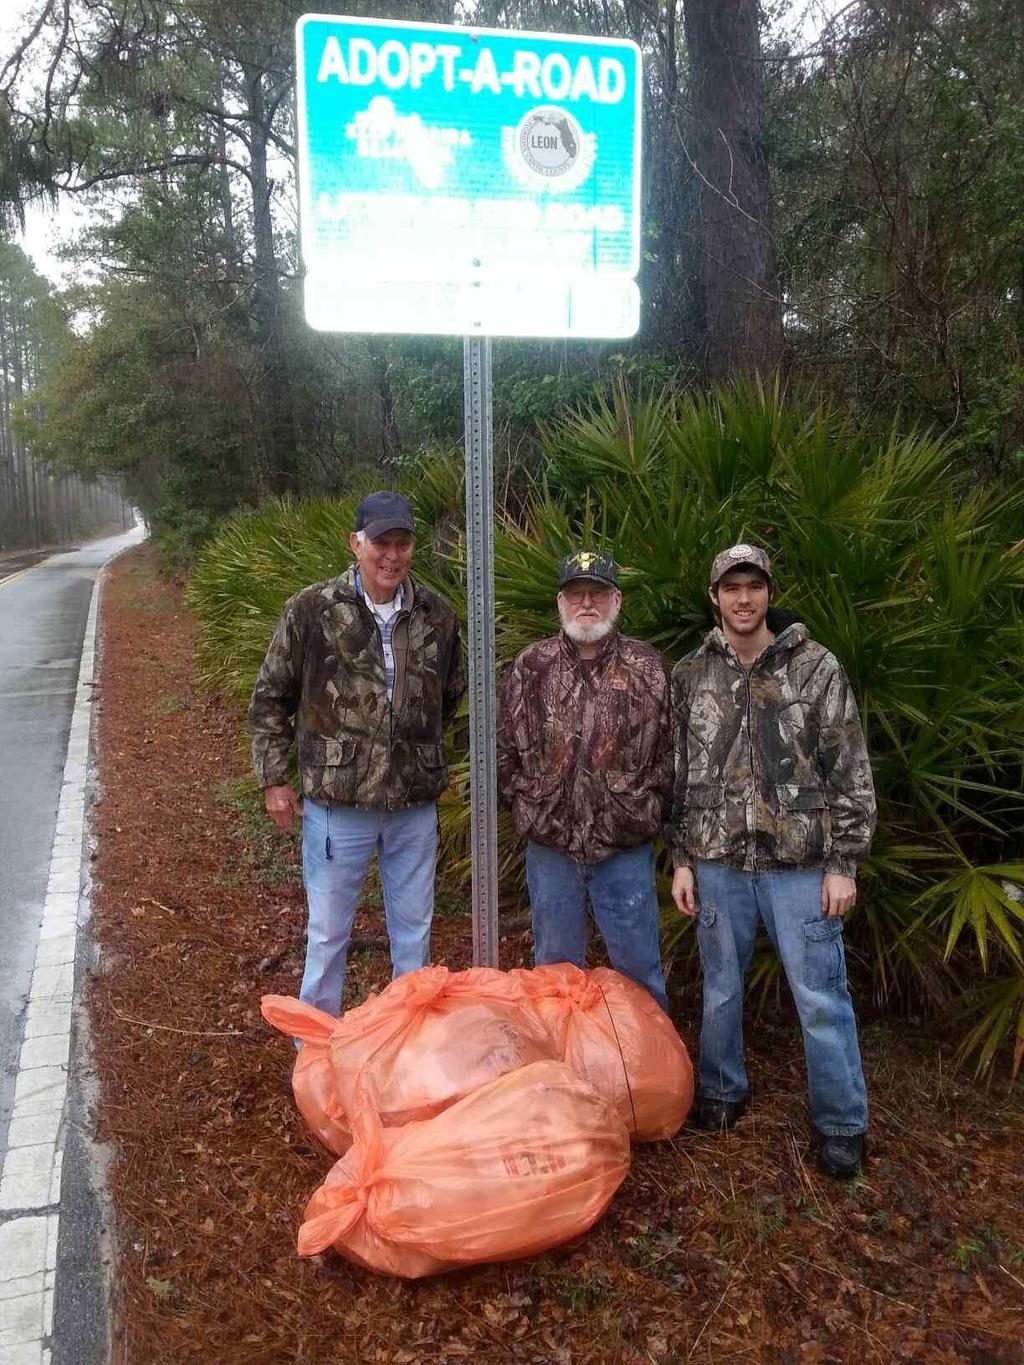 Finley s Brigade Adopt-a-Road For over two years now, Finley s Brigade has been maintaining the two mile stretch of Natural Bridge Road that terminates at the Natural Bridge Battlefield Park.